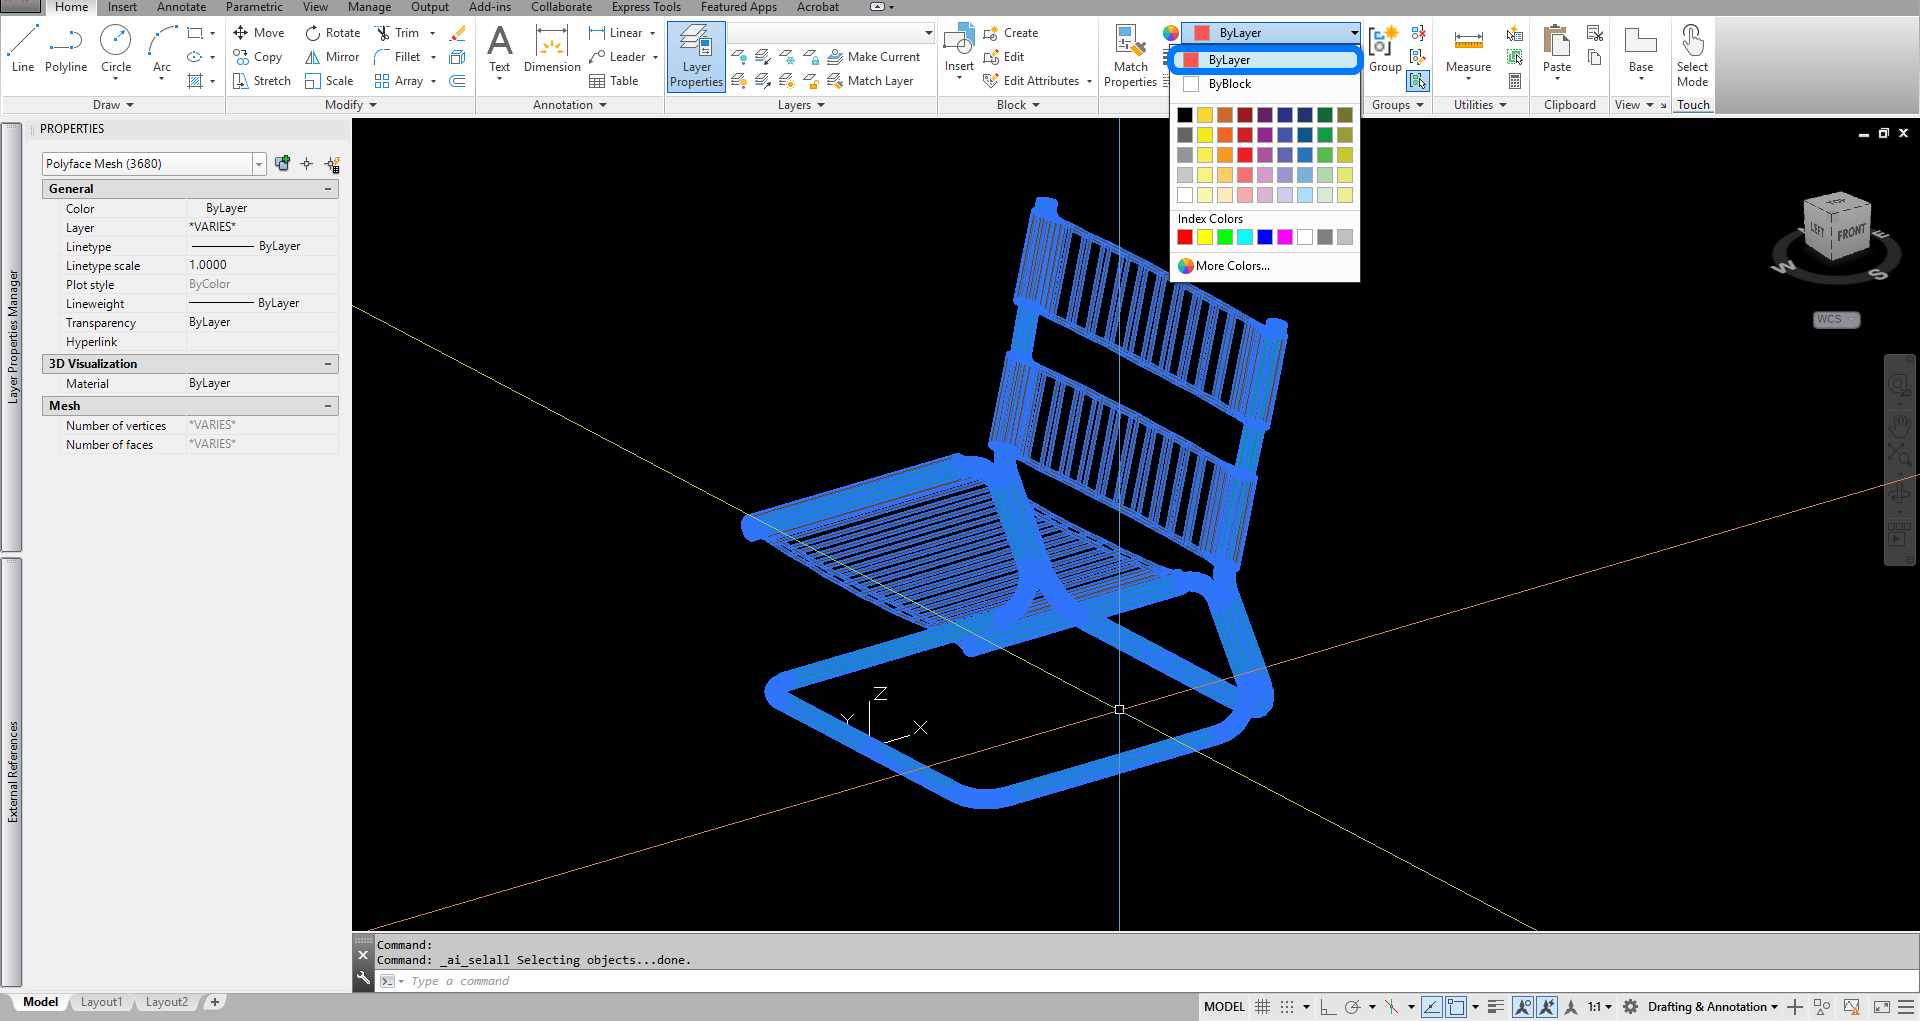 It indicates how to adjust the layer color setting for defining materials in Revit.